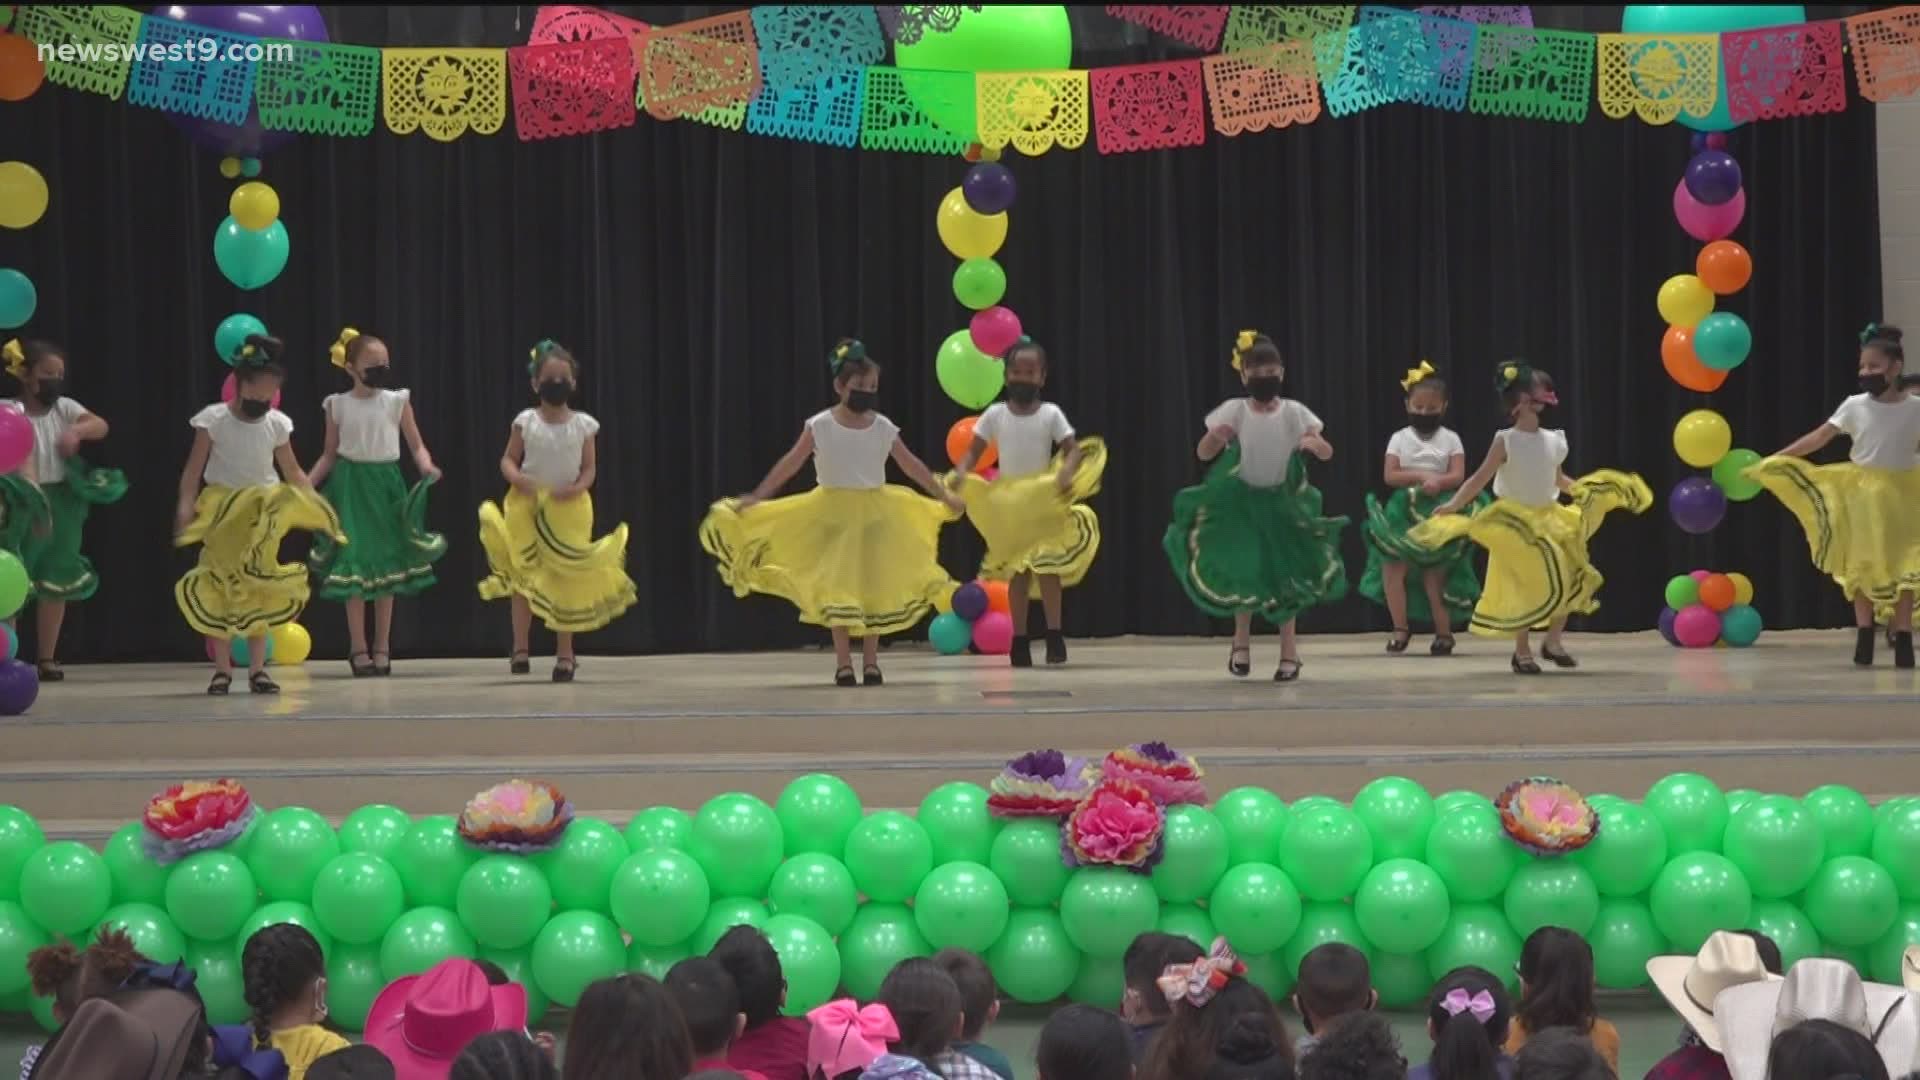 The school hopes to emphasize an appreciation of cultural diversity among students.